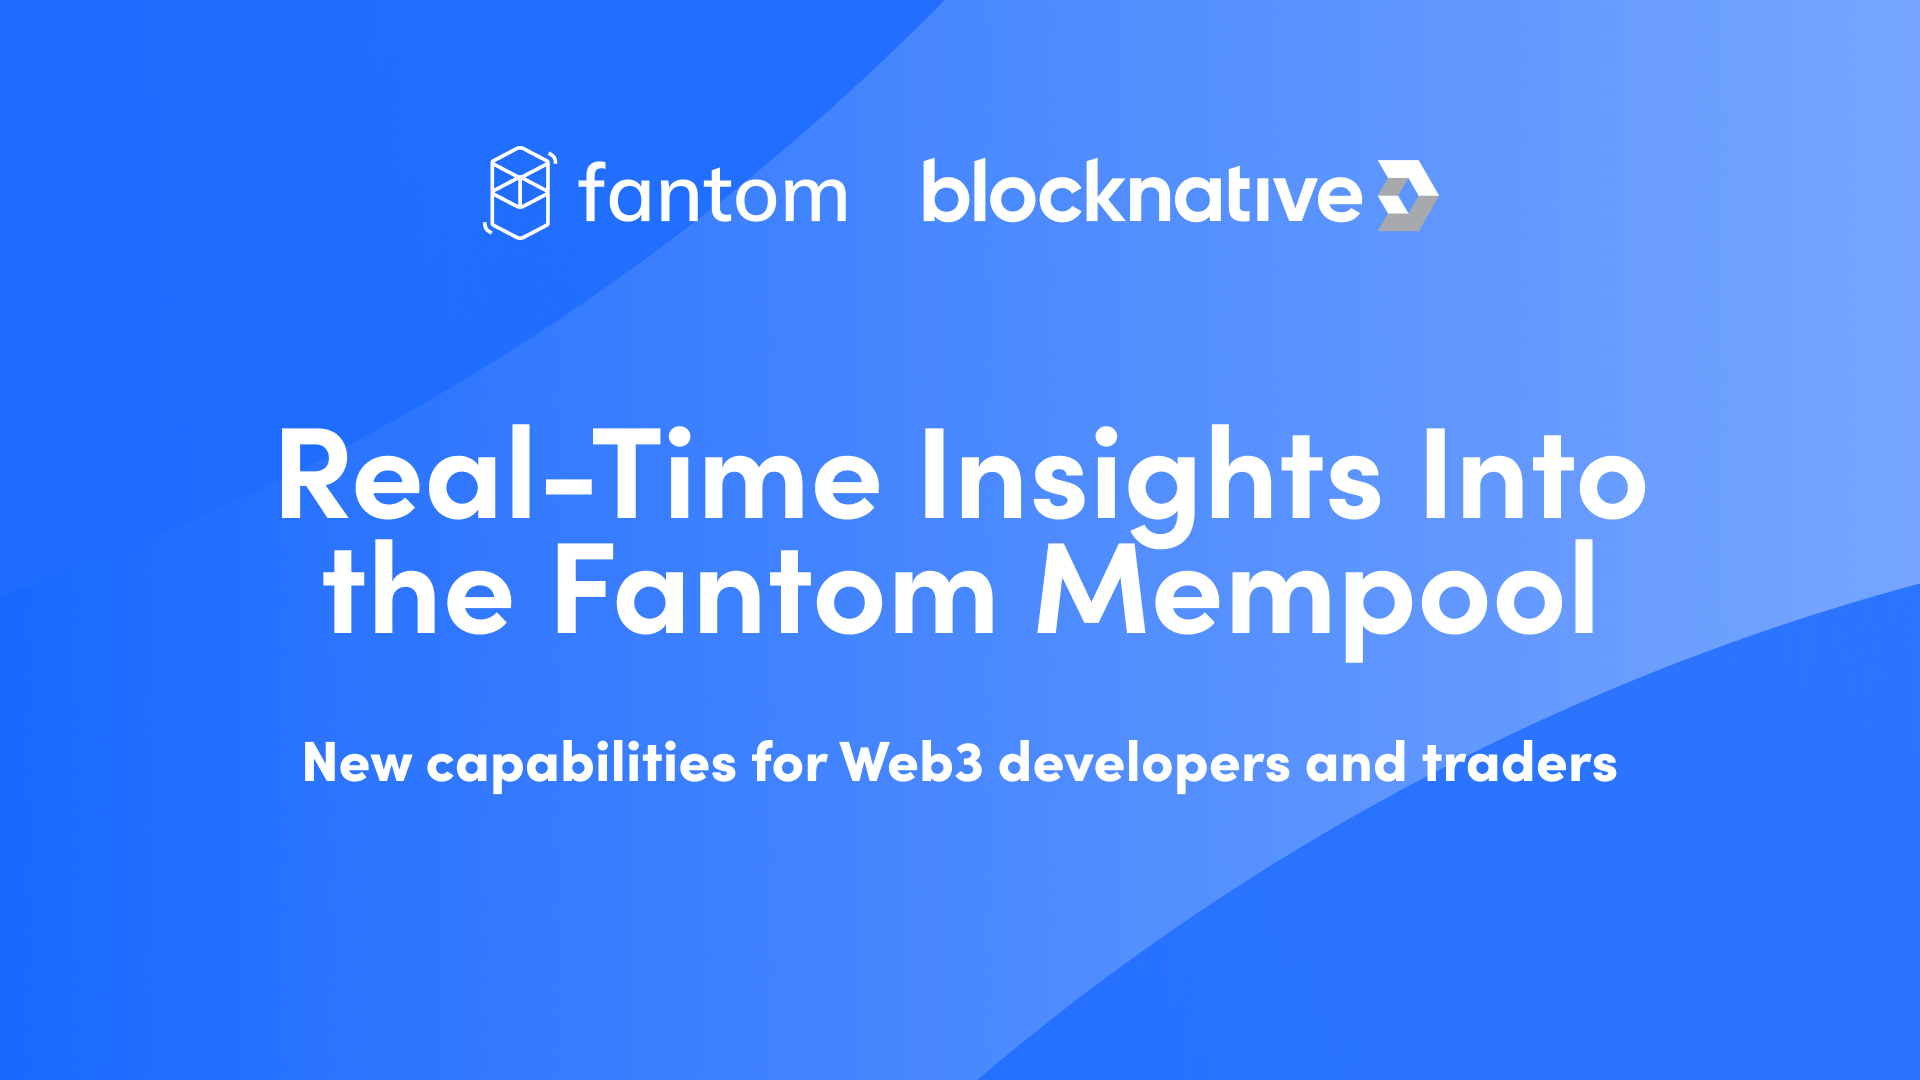 gain-real-time-insights-into-the-fantom-mempool-with-blocknative